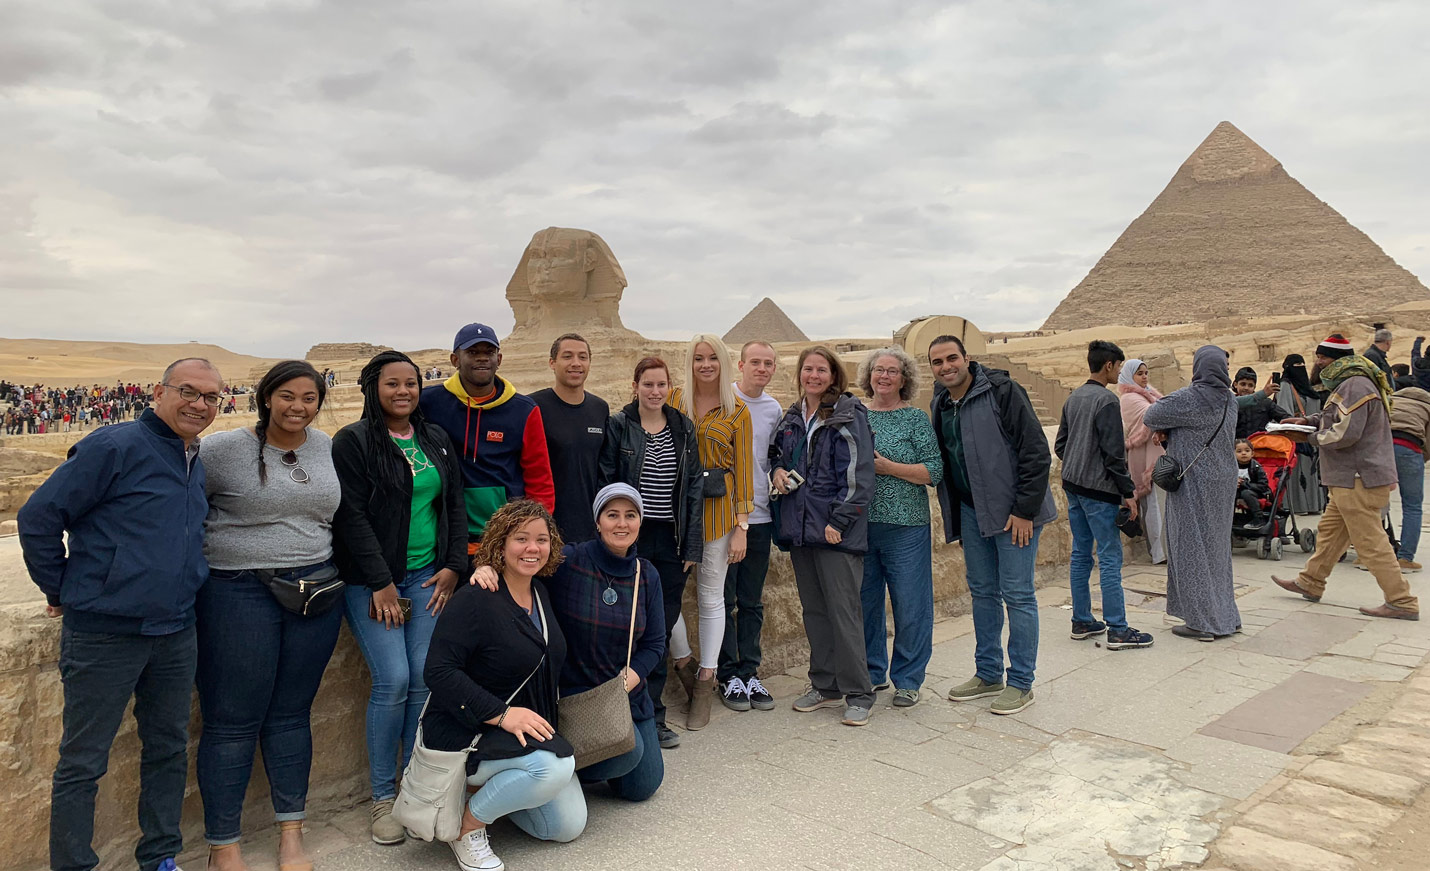 Group in front of pyramids